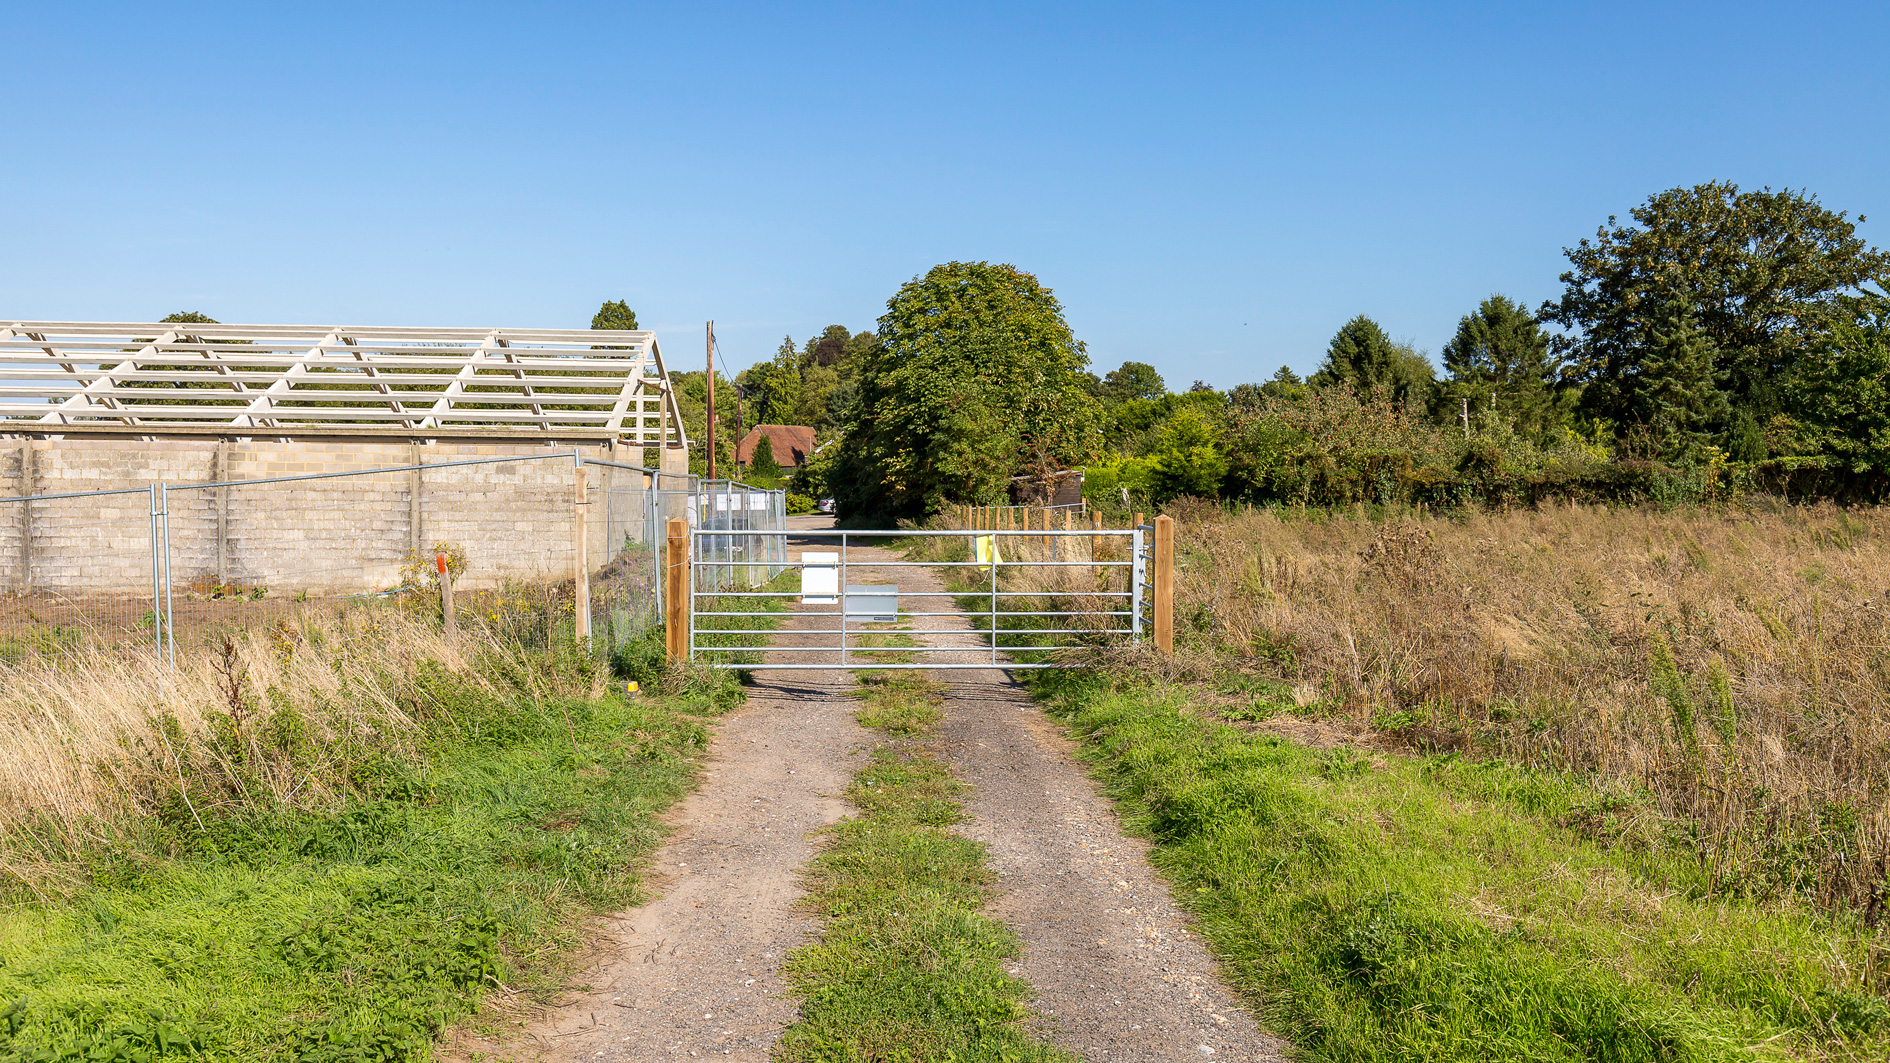 Land for sale at Manor Farm Cottages access